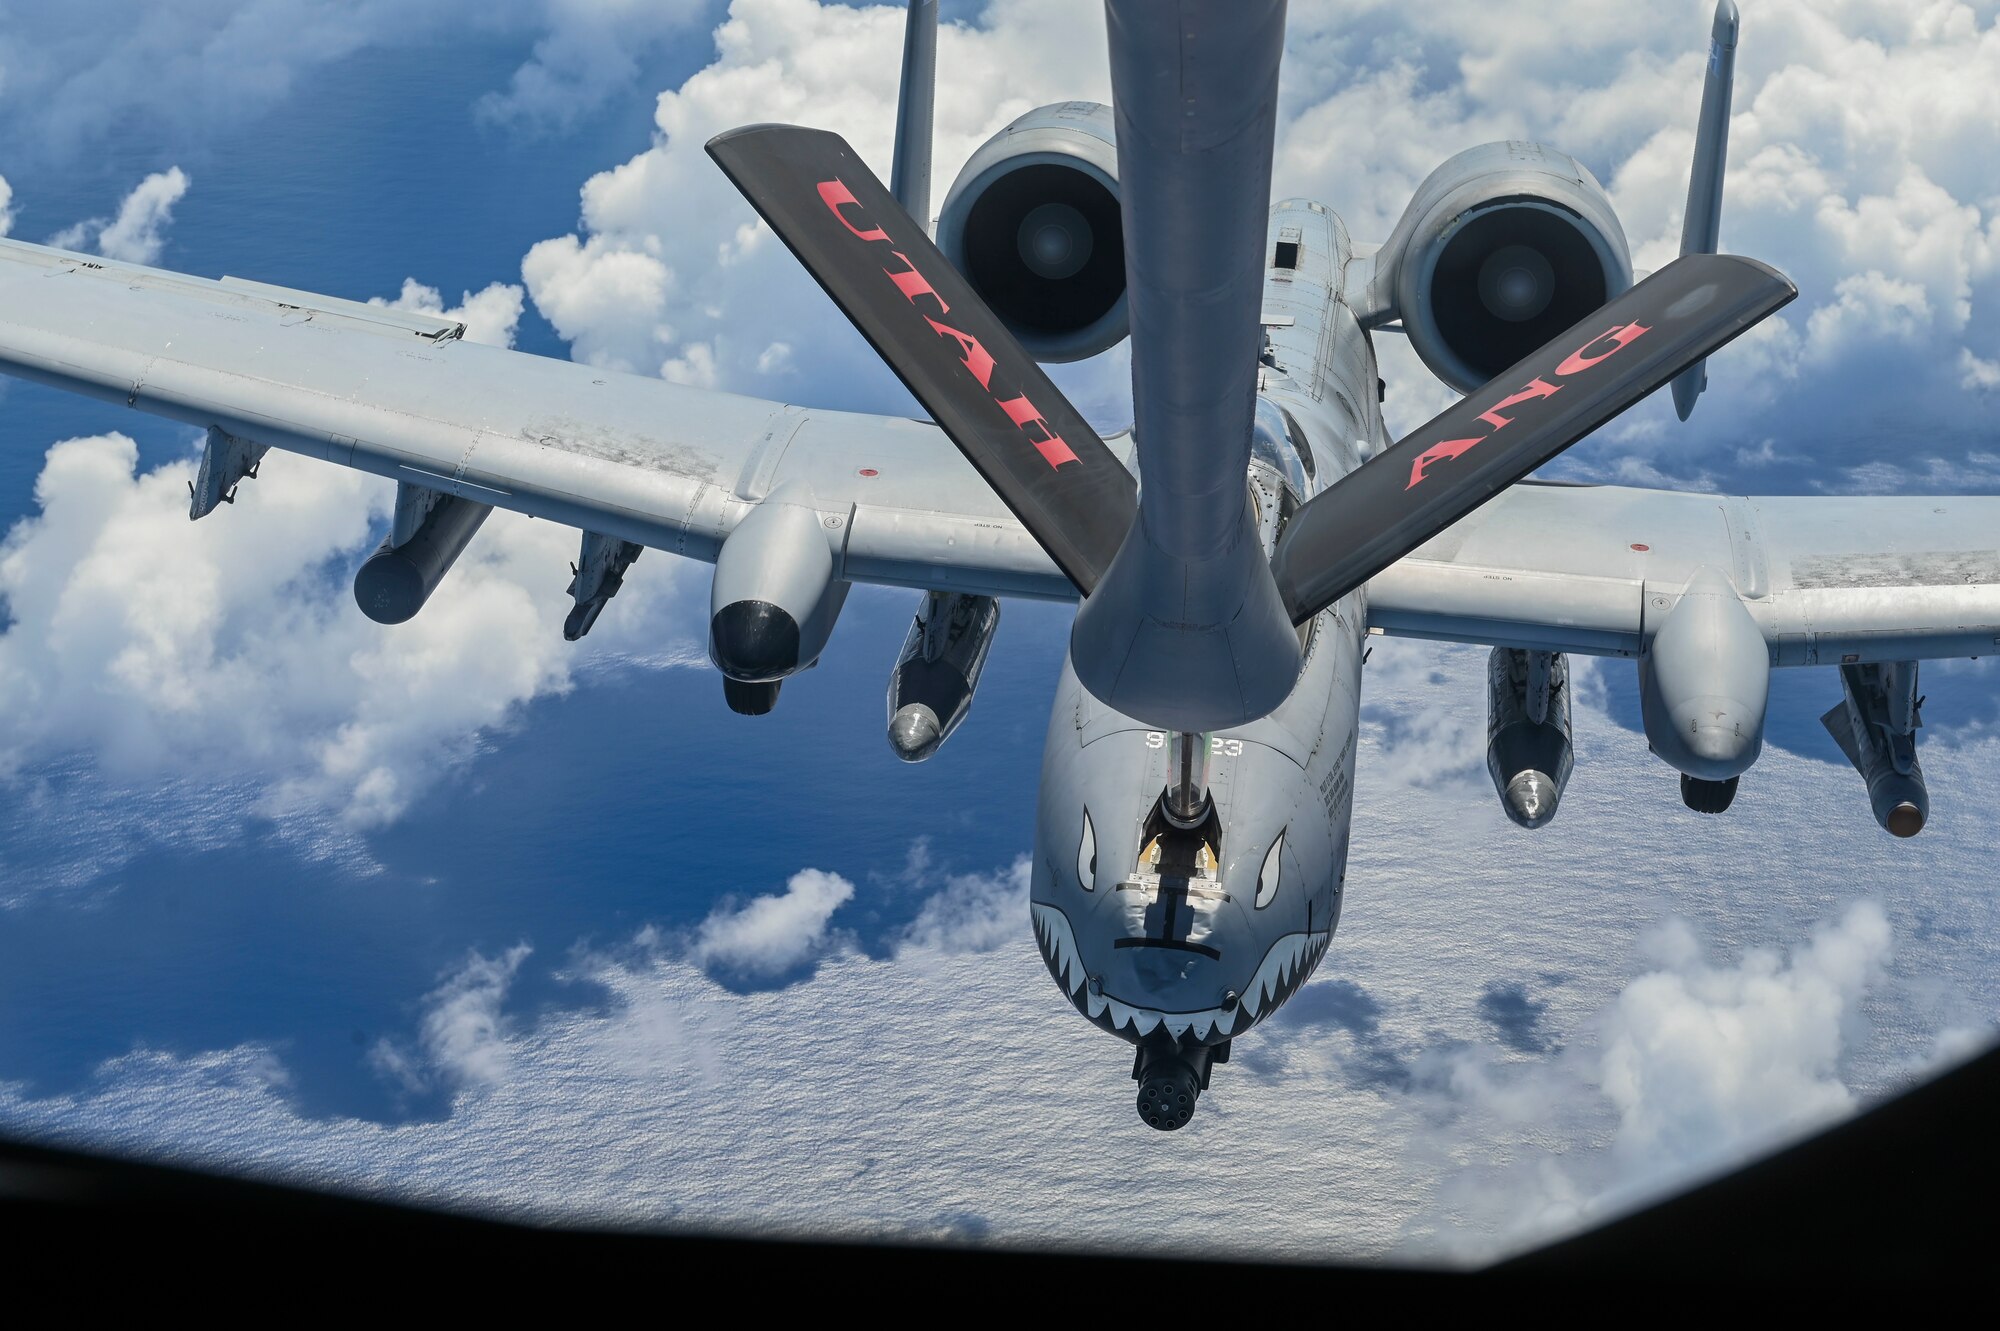 A plane aerial refueling